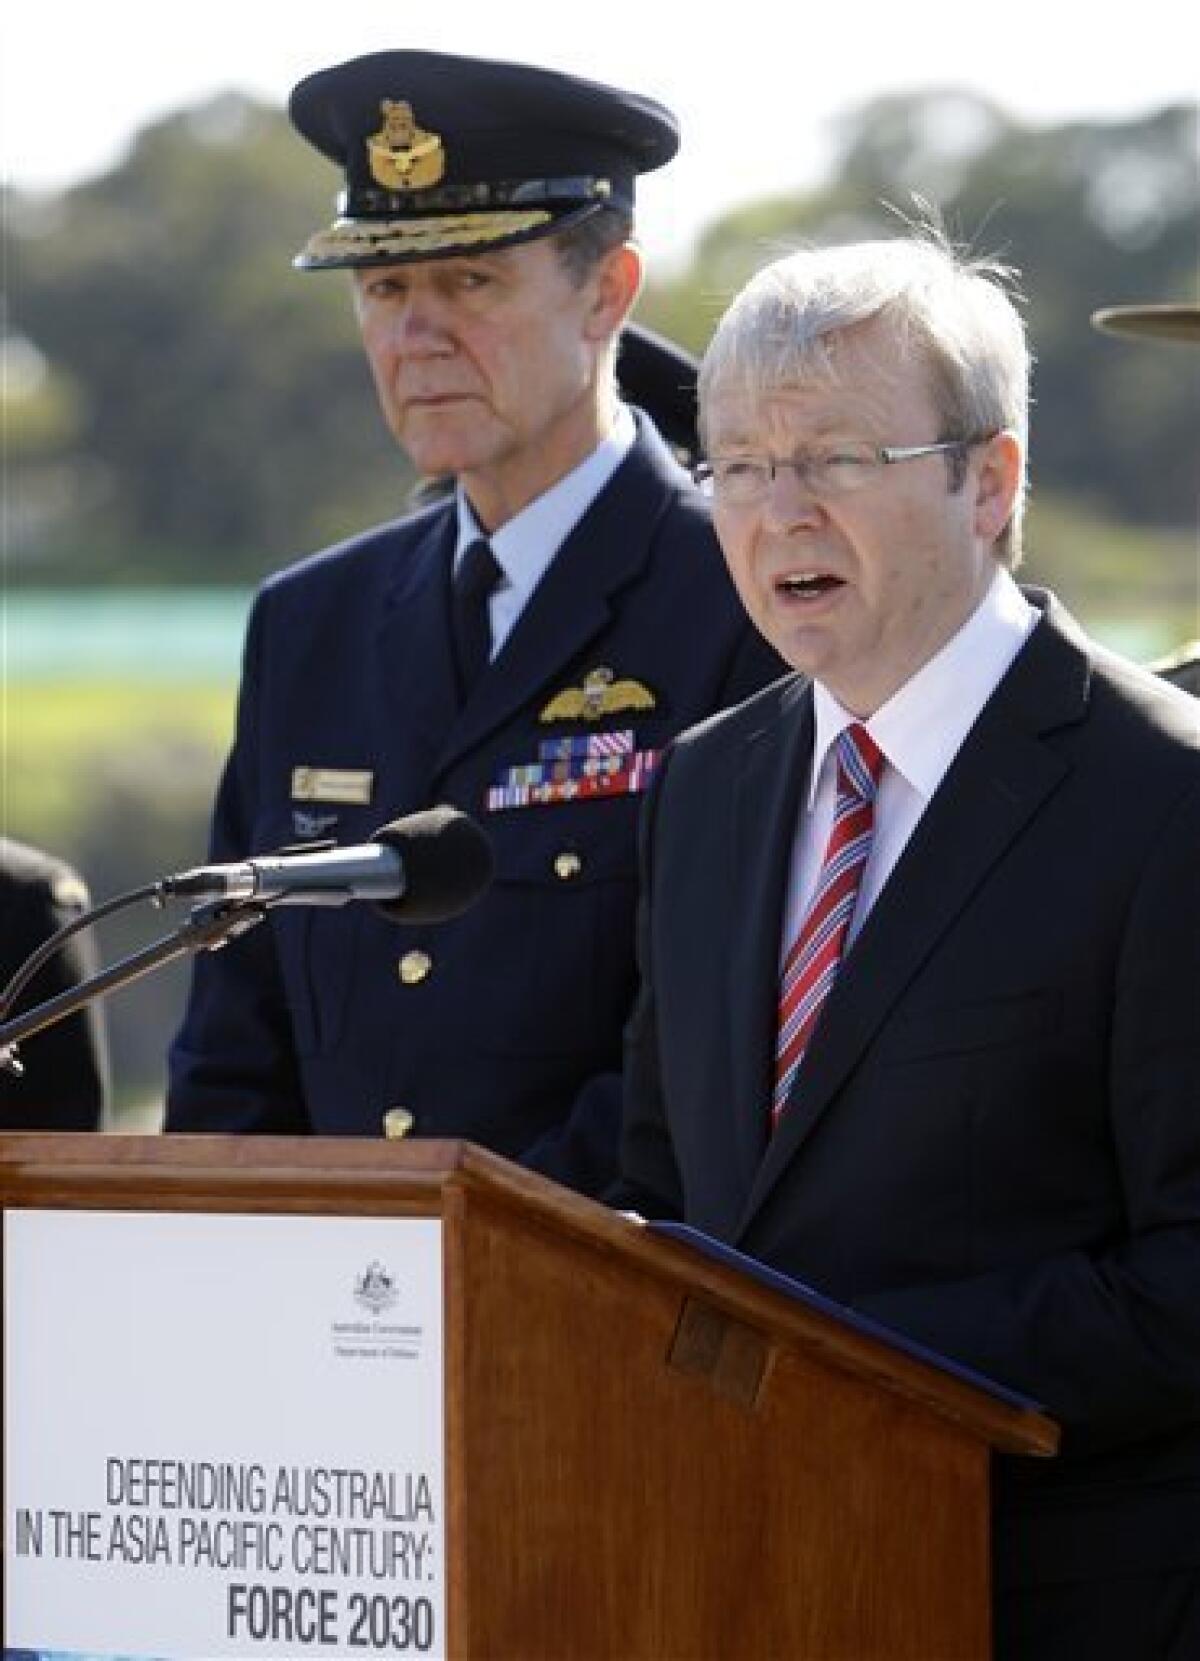 Prime Minister Kevin Rudd, right, announces the government's defense white paper as Chief of the Defense Force Angus Houston, left, looks on, aboard HMAS Stuart at Garden Island naval base in Sydney, Australia, Saturday, May 2, 2009. Its 140-page white paper - Defending Australia in the Asia Pacific Century: Force 2030, released on Saturday - outlines defense and strategic planning and signals what the government calls a major new direction aimed at building a "heavier" naval, air combat and logistics capability in the Asia Pacific. (AP Photo/Rick Rycroft)